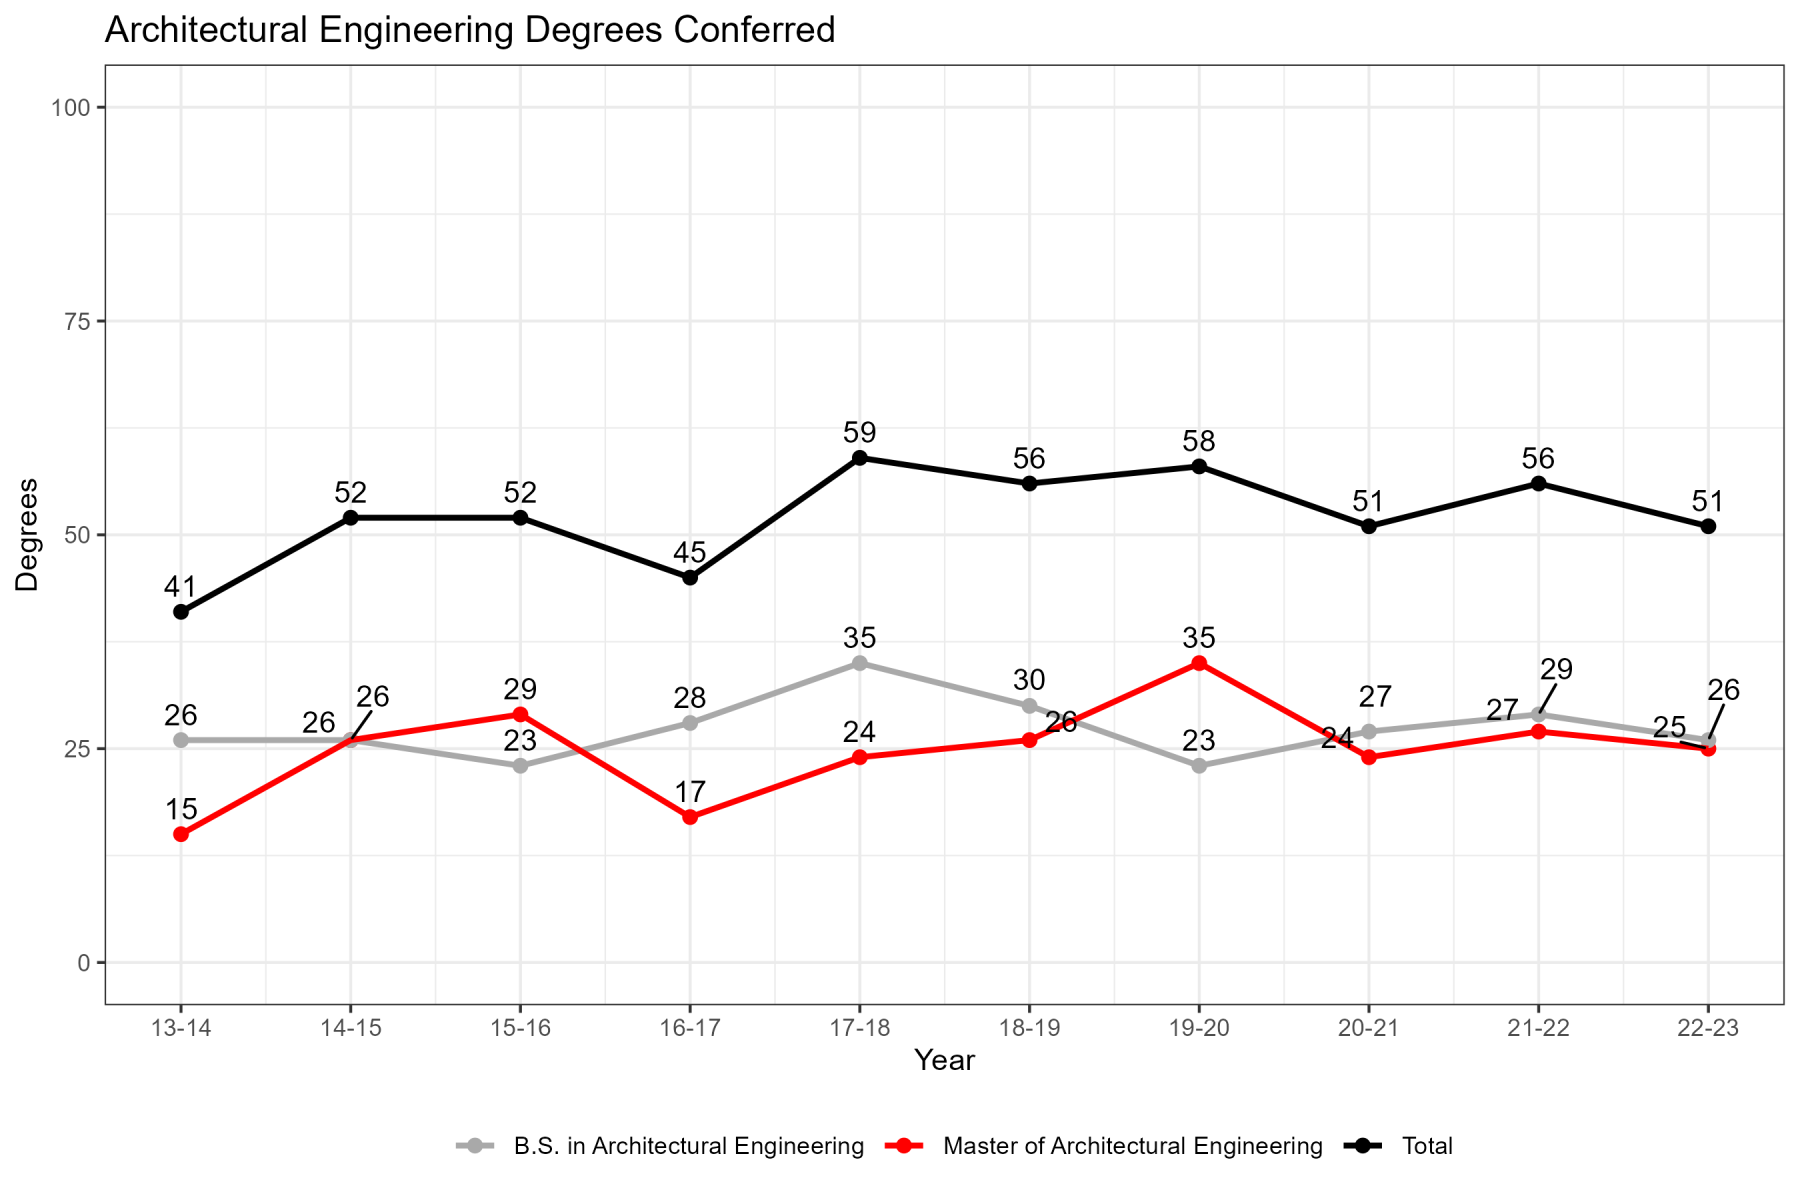 Bachelor of Science in Architectural Engineering ABET Degrees Conferred Chart and Master of Architectural Engineering ABET Degrees Conferred Chart